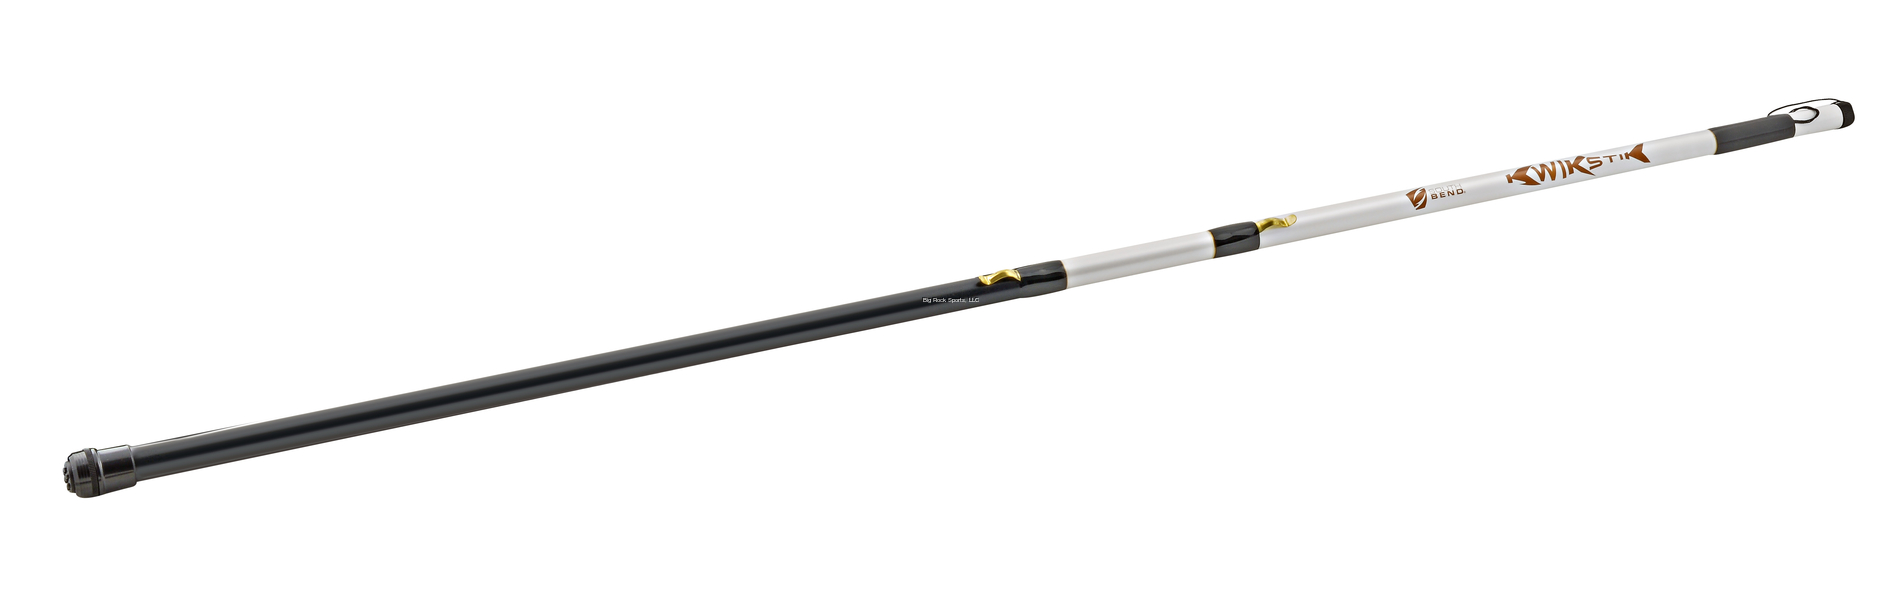 South Bend KS-17 17′ Extendo Pole – Buck and Dumb Bass Outdoors